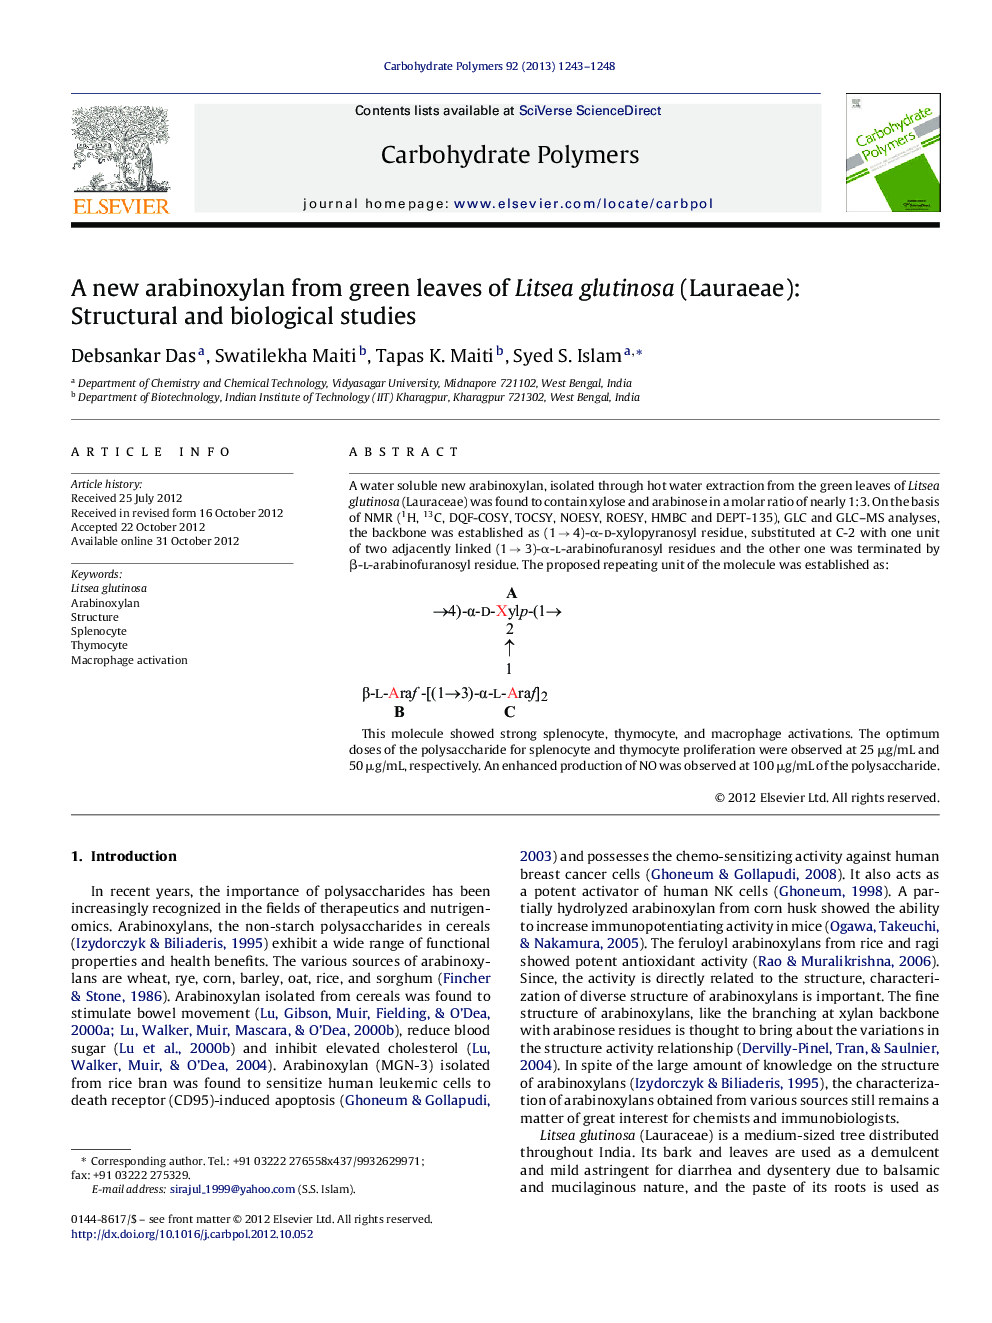 A new arabinoxylan from green leaves of Litsea glutinosa (Lauraeae): Structural and biological studies